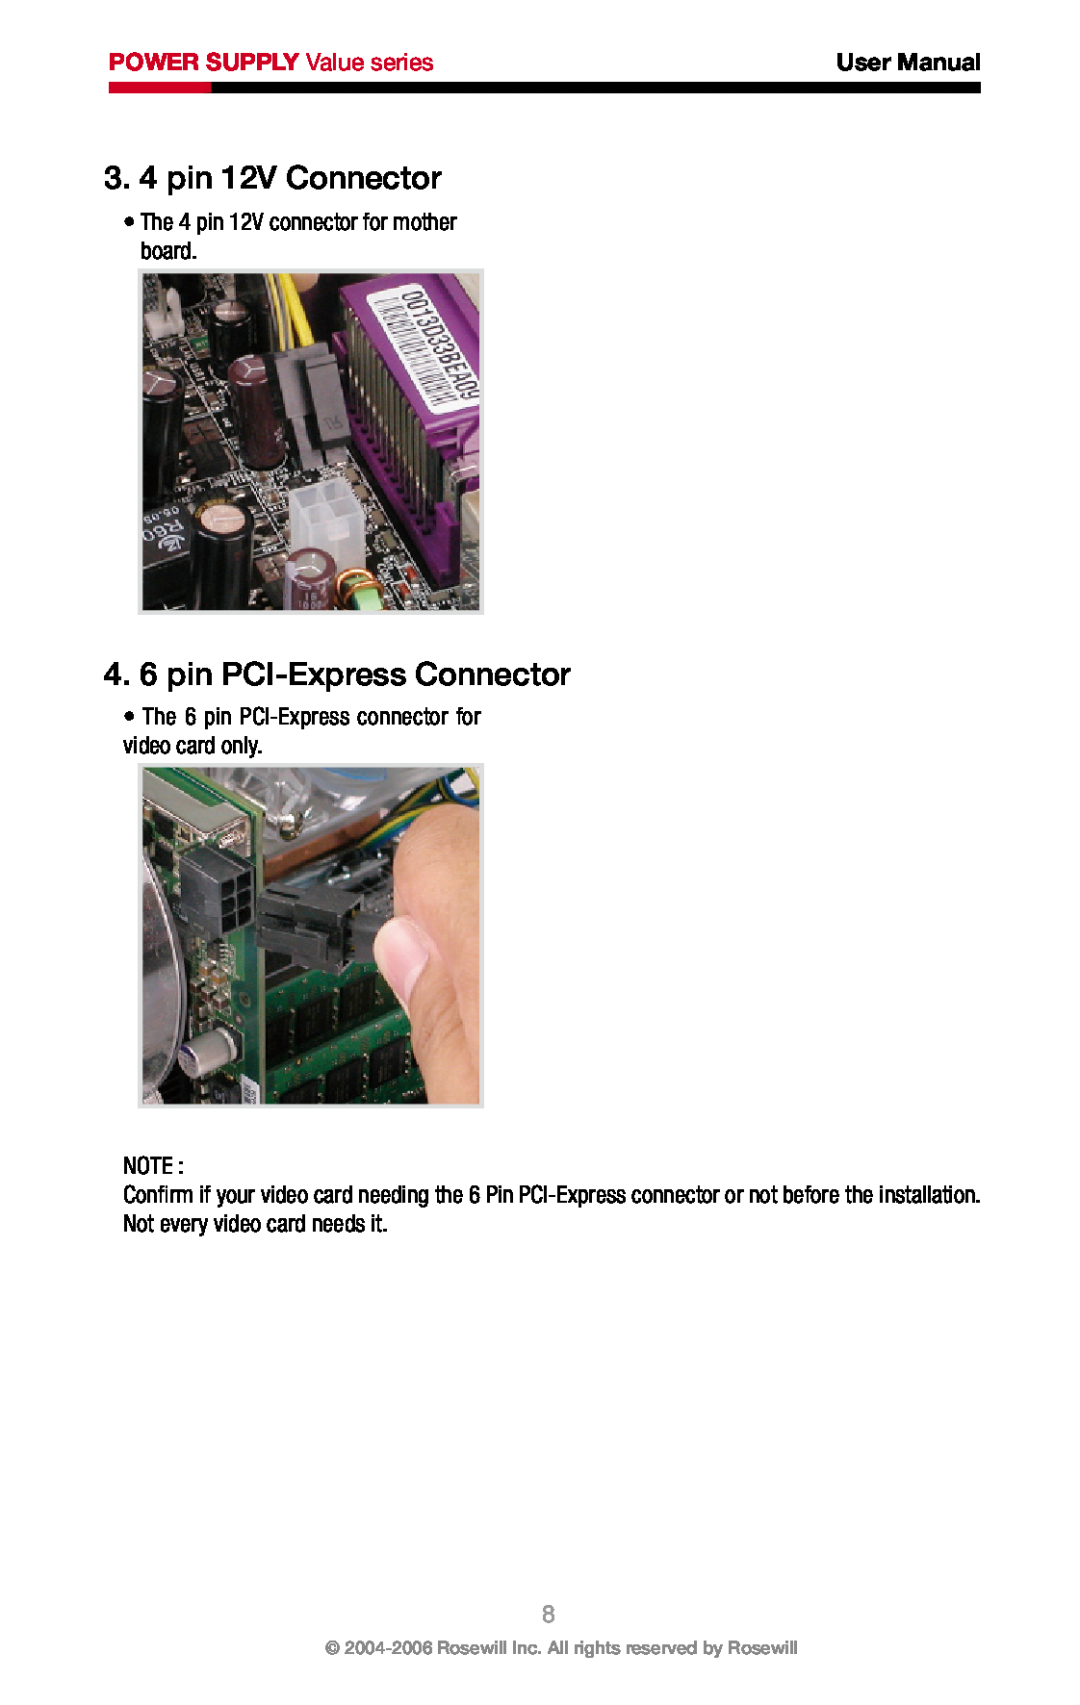 Rosewill RV-430-2-FRB 3. 4 pin 12V Connector, 4. 6 pin PCI-Express Connector, POWER SUPPLY Value series, User Manual 